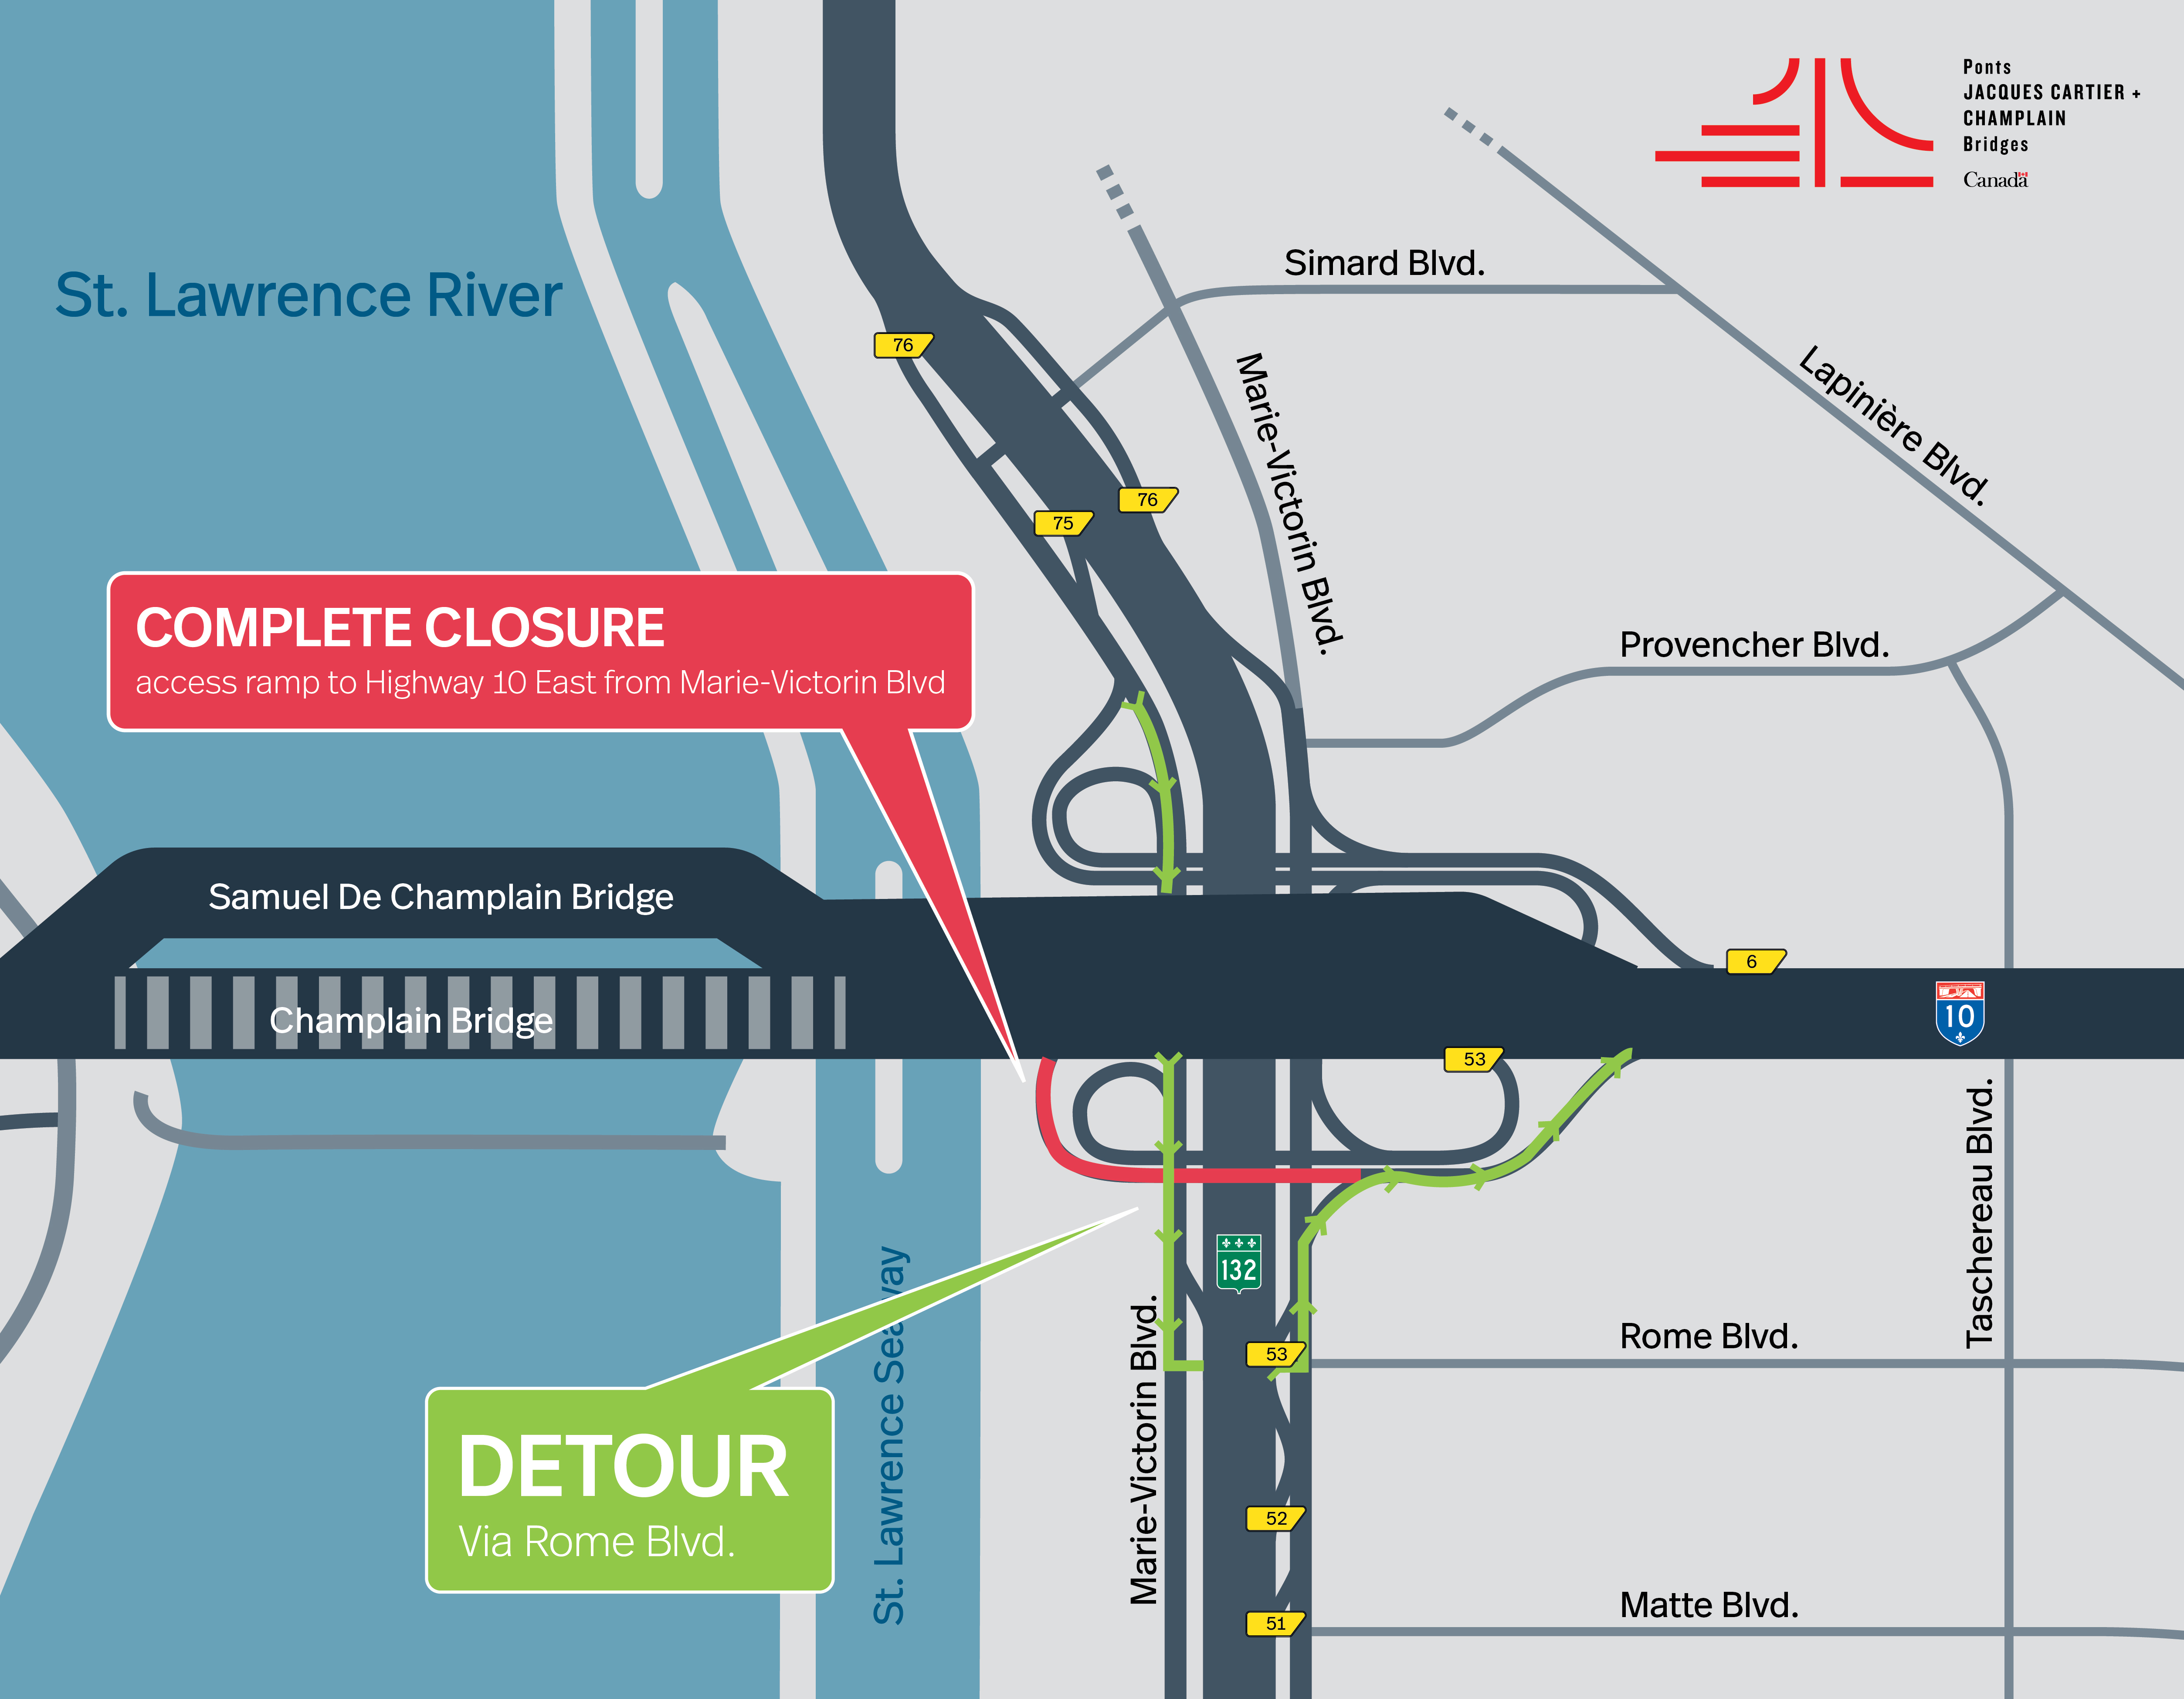 Brossard Sector | Complete closure of the access ramp from Blvd. Marie-Victorin West to Hwy. 10 East, on September 8